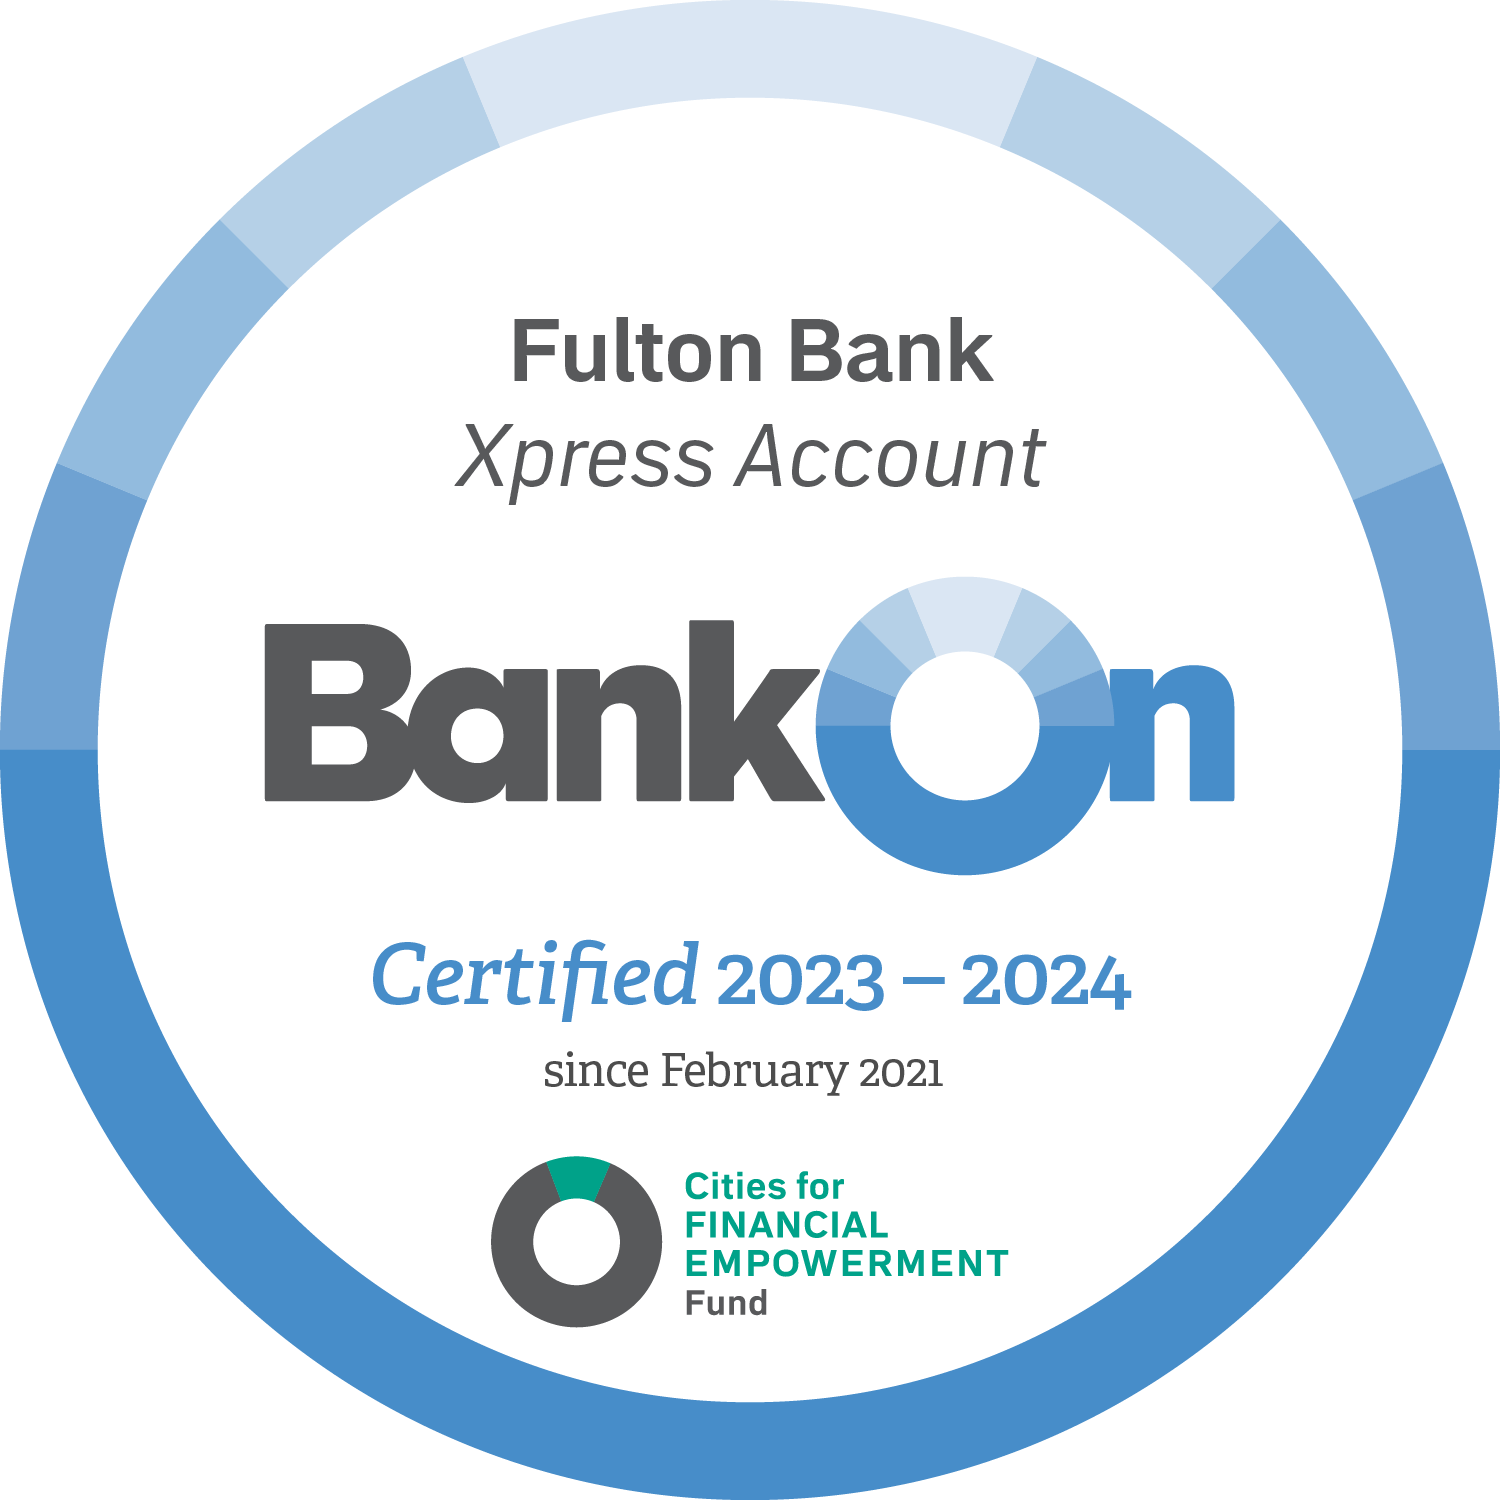 Bank On certification seal